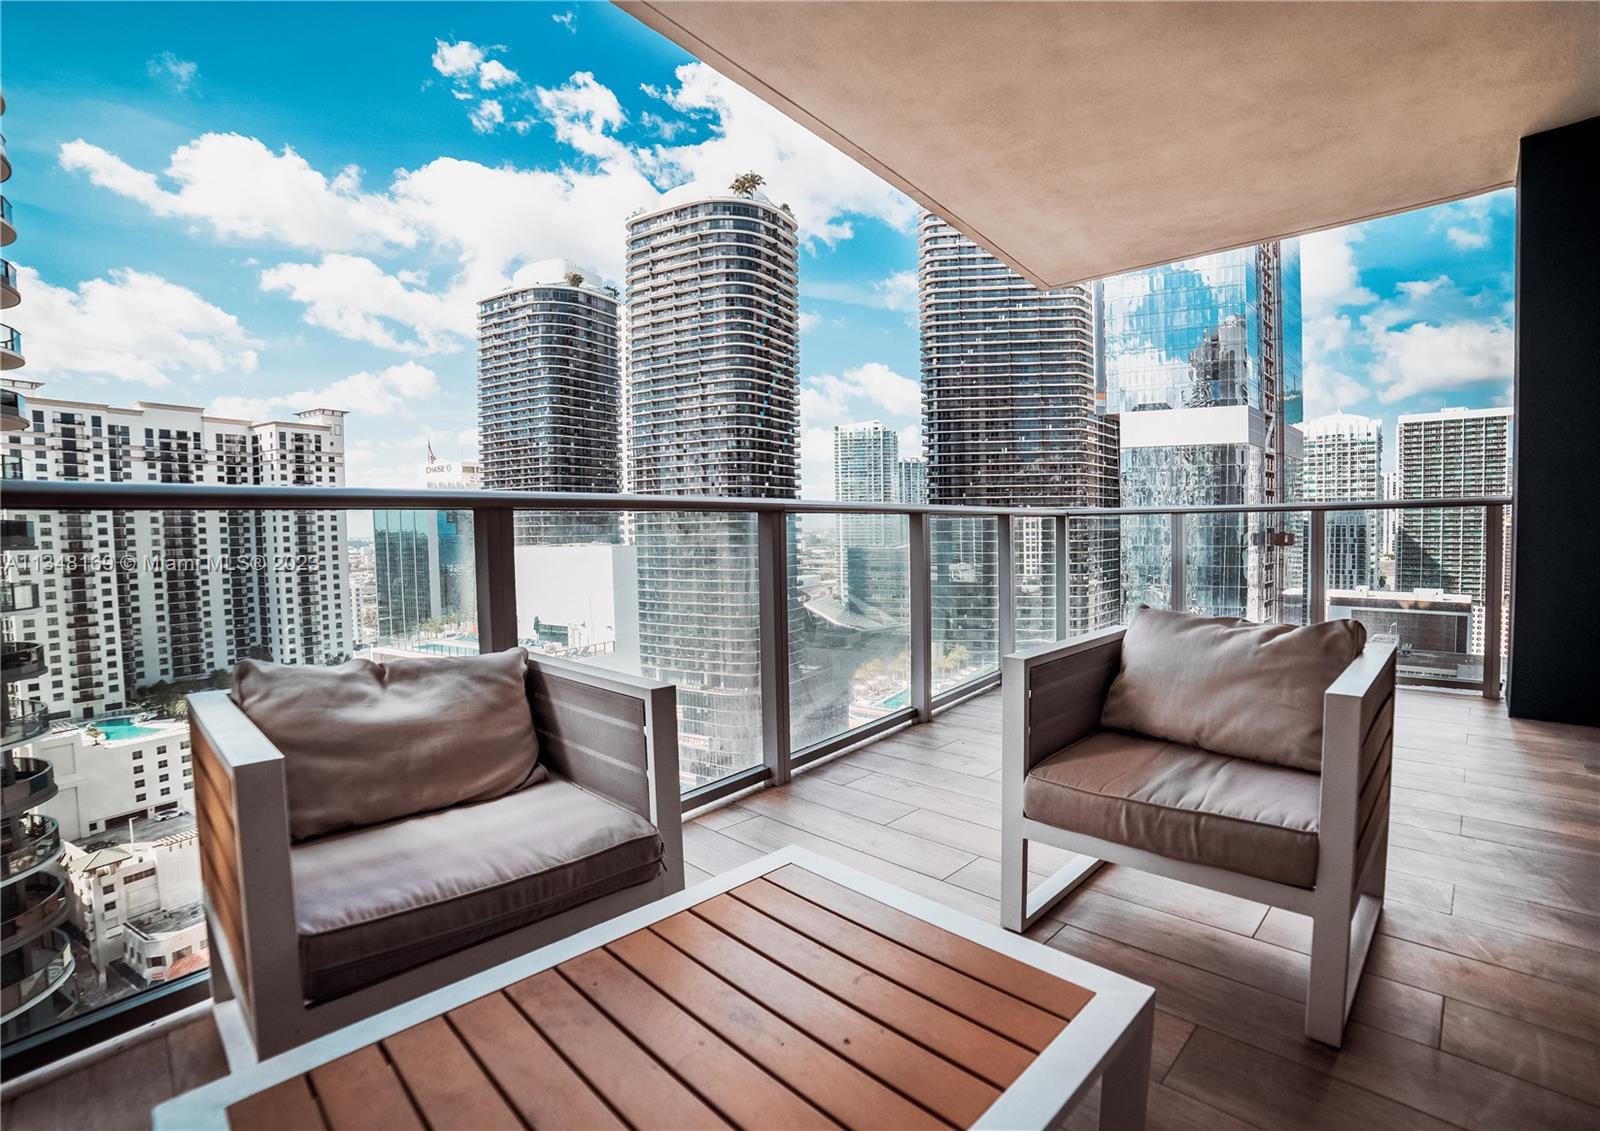 Fully furnished 1 Bedroom plus den (converted into bedroom with Queen bed). Includes stand up/sit down desk with multiple monitors. Perfect for working at home! This corner unit with great view makes this one of the best lines in the building! Your new home will have floor-to-ceiling glass windows and a private balcony with glass railings! 1010 Brickell is a luxury building with top of the line amenities.  This includes rooftop lounge, sunrise and sunset pool, outdoor theater, and fire pit. The gym also offers bocce ball court, squash court, basketball court, and a full-service spa with a co-ed hammam, golf simulator, and more. Owner wants to rent 6-10 months.